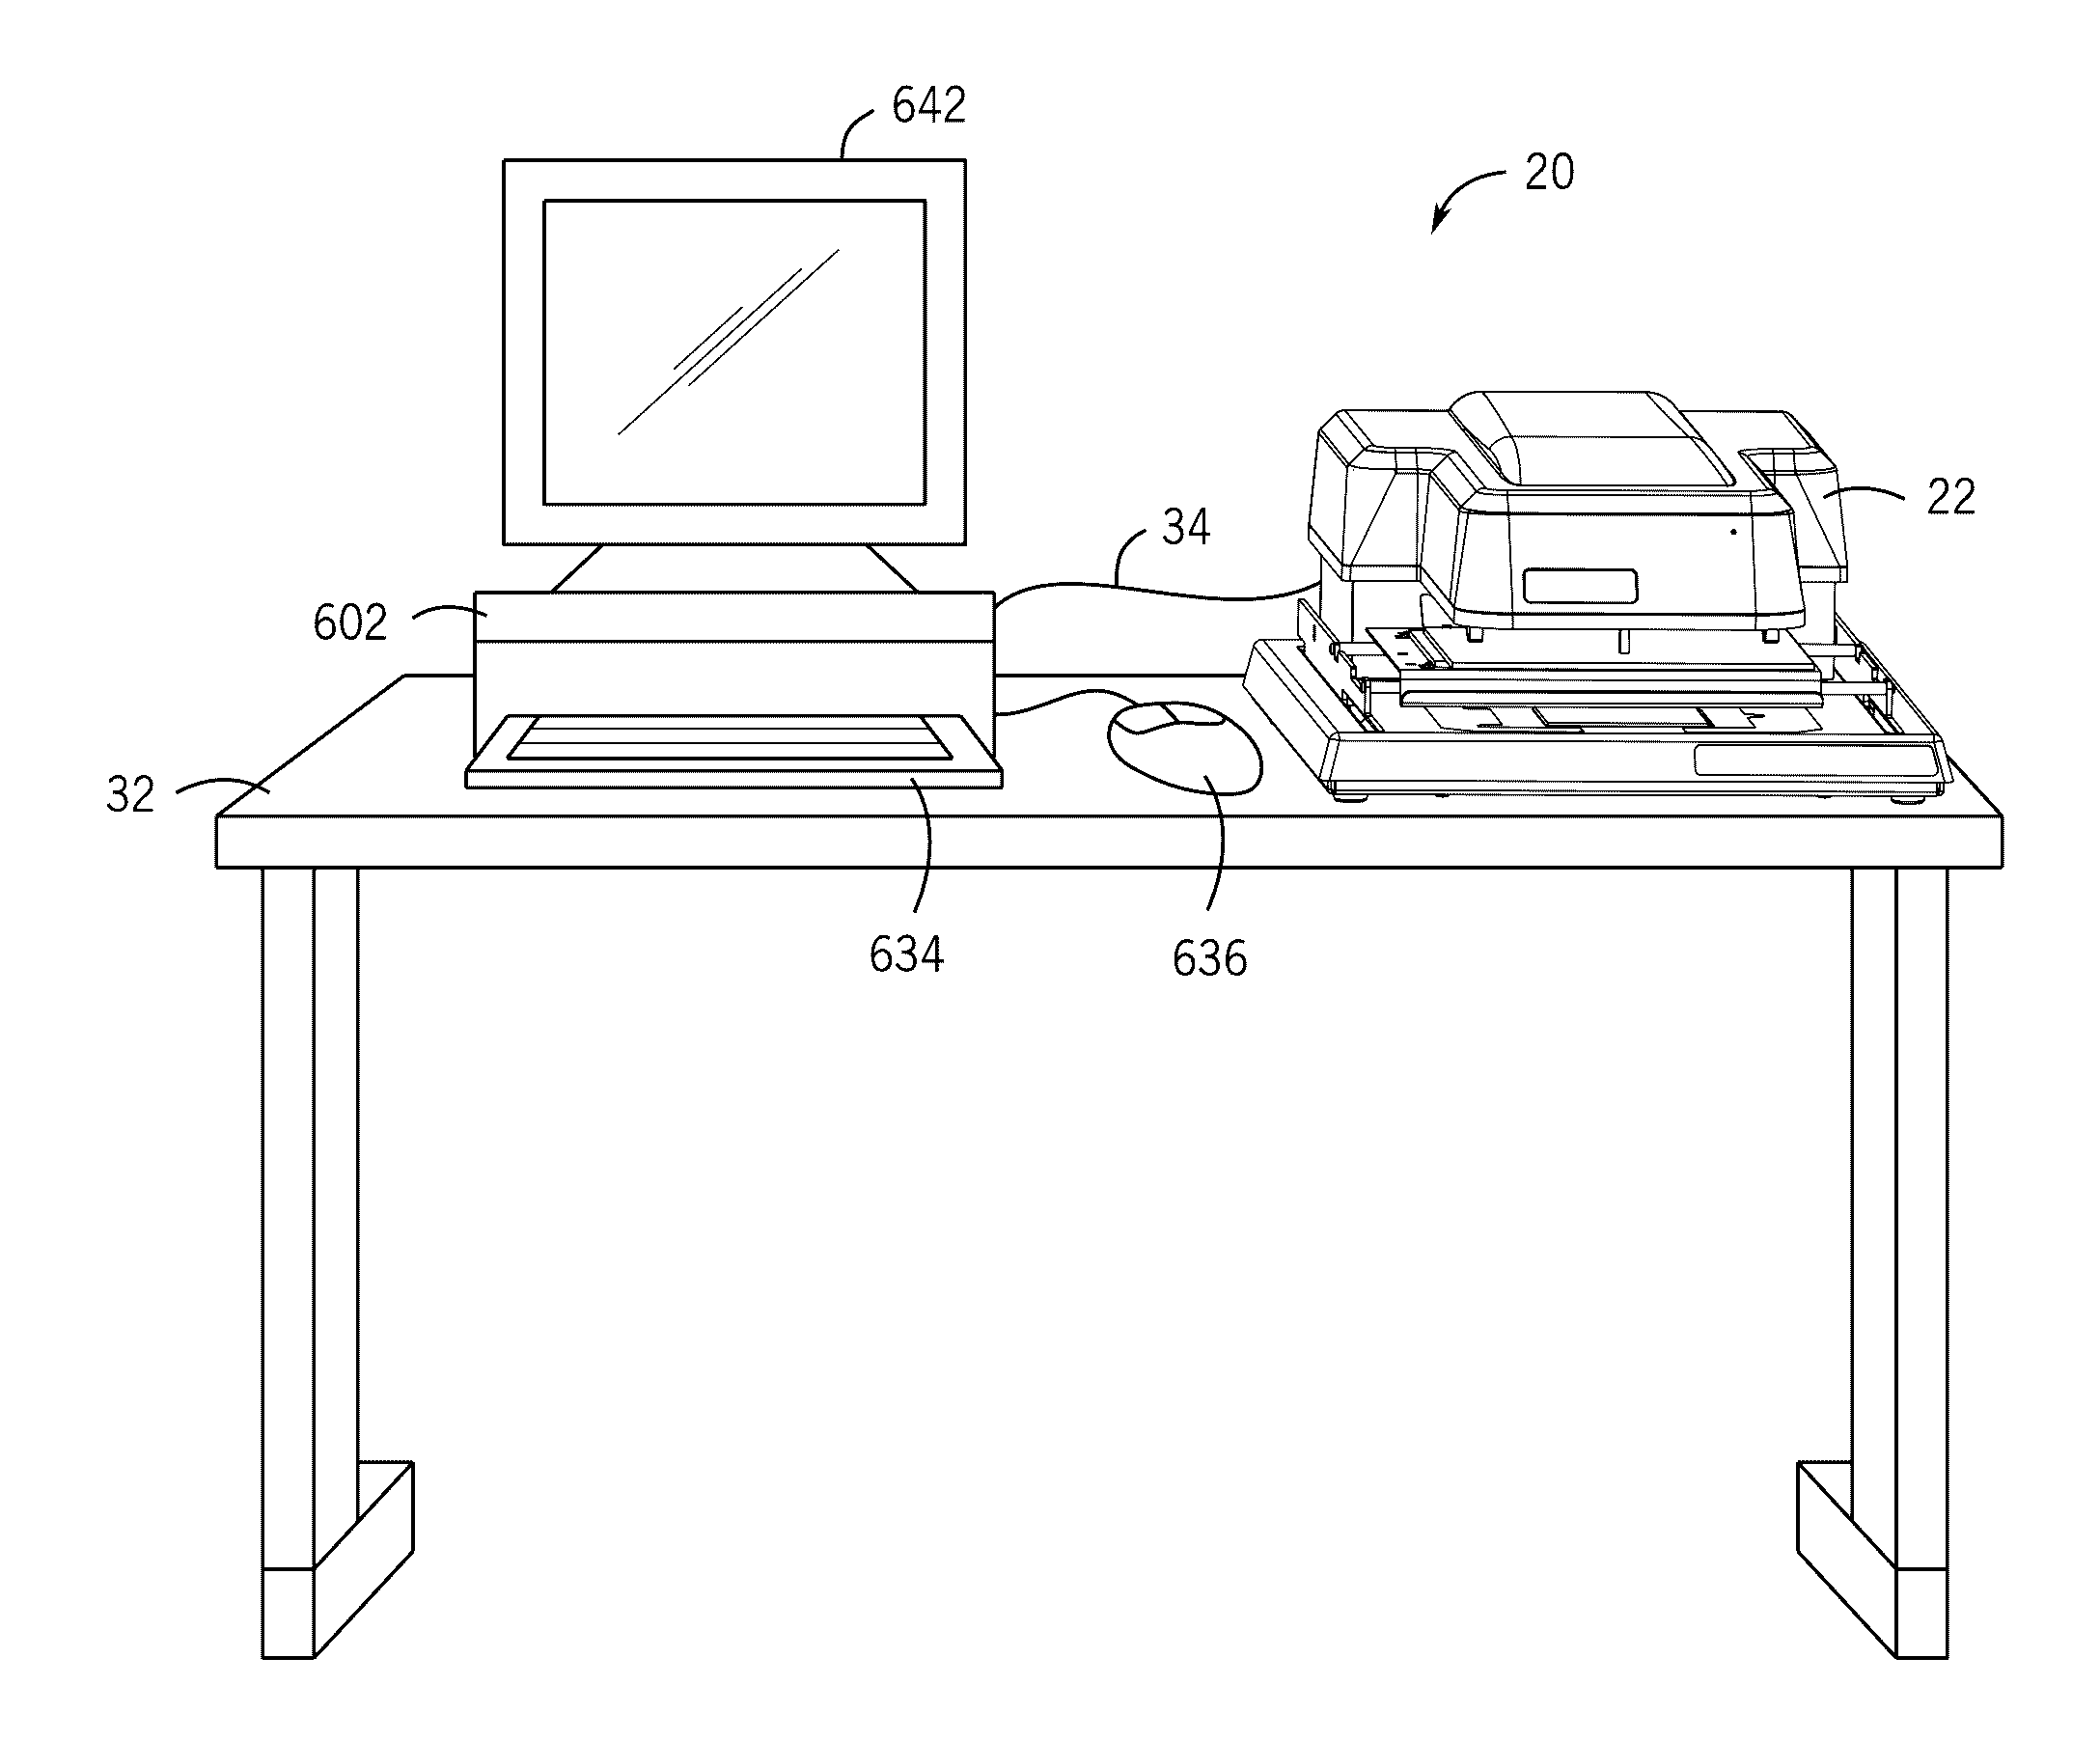 Image mark sensing systems and methods